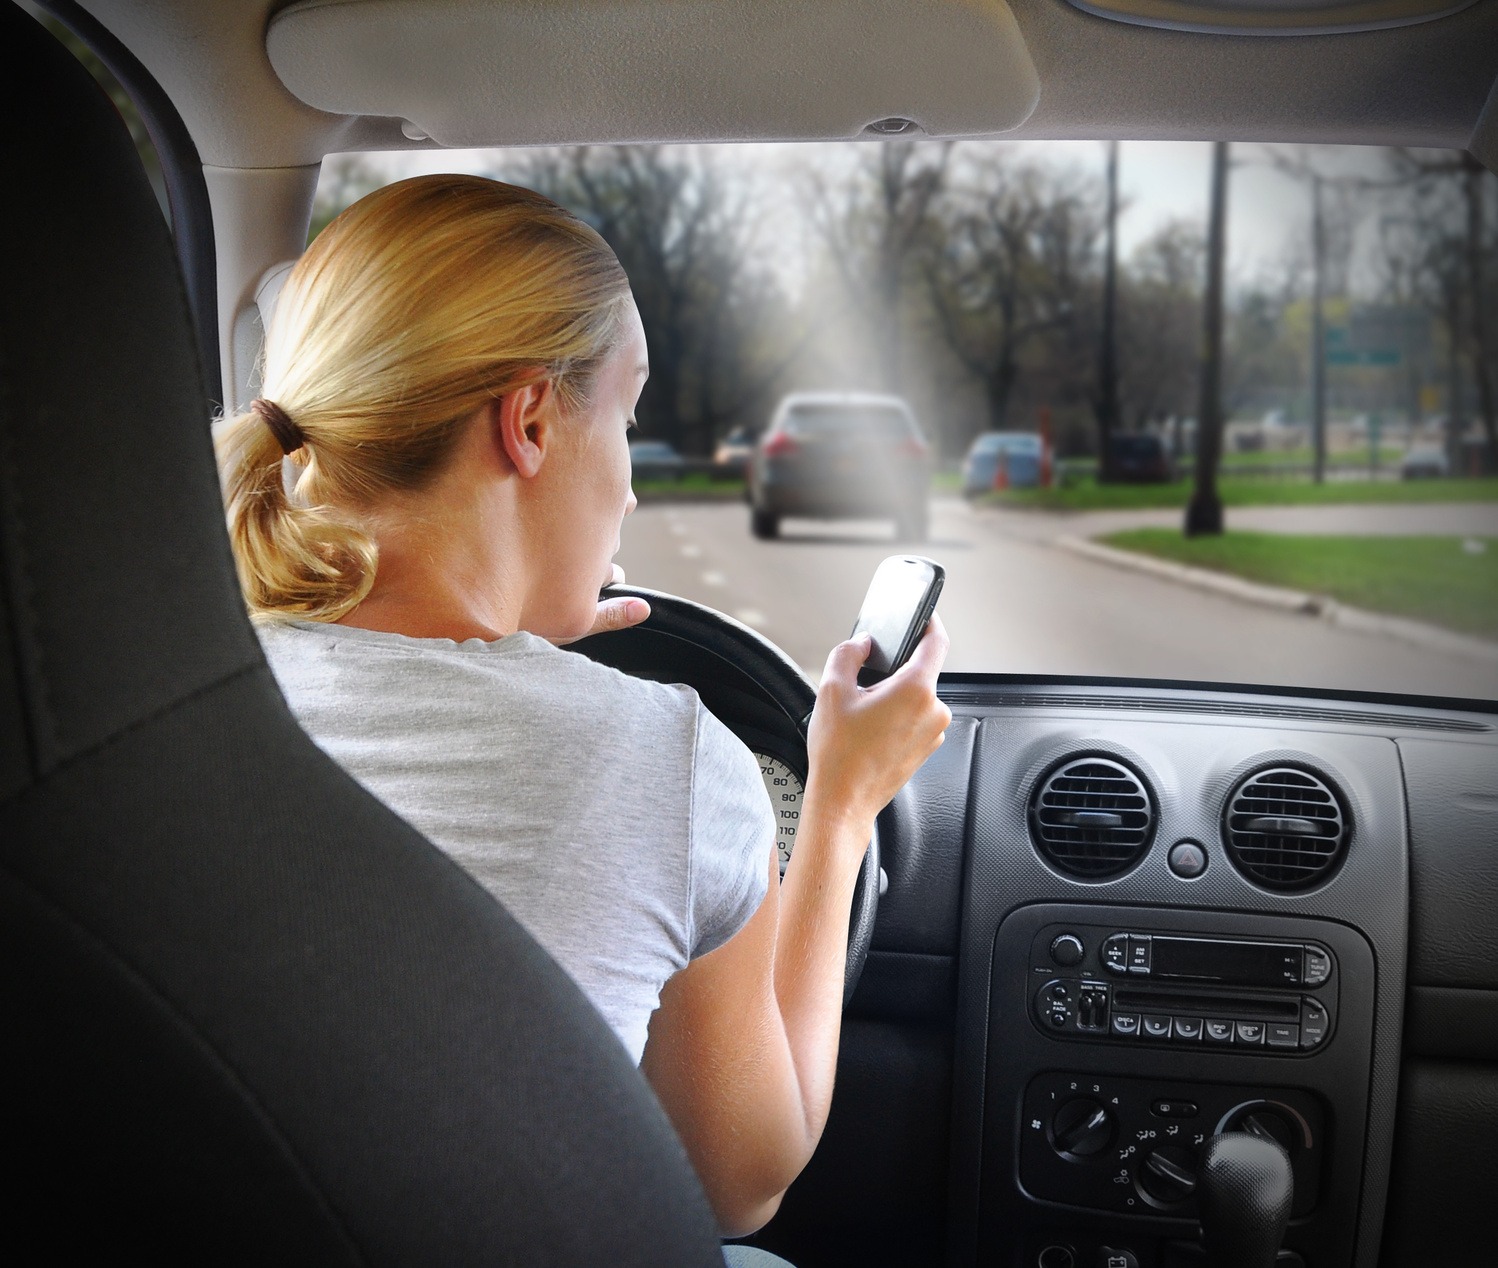 3 Apps to Prevent Texting and Driving